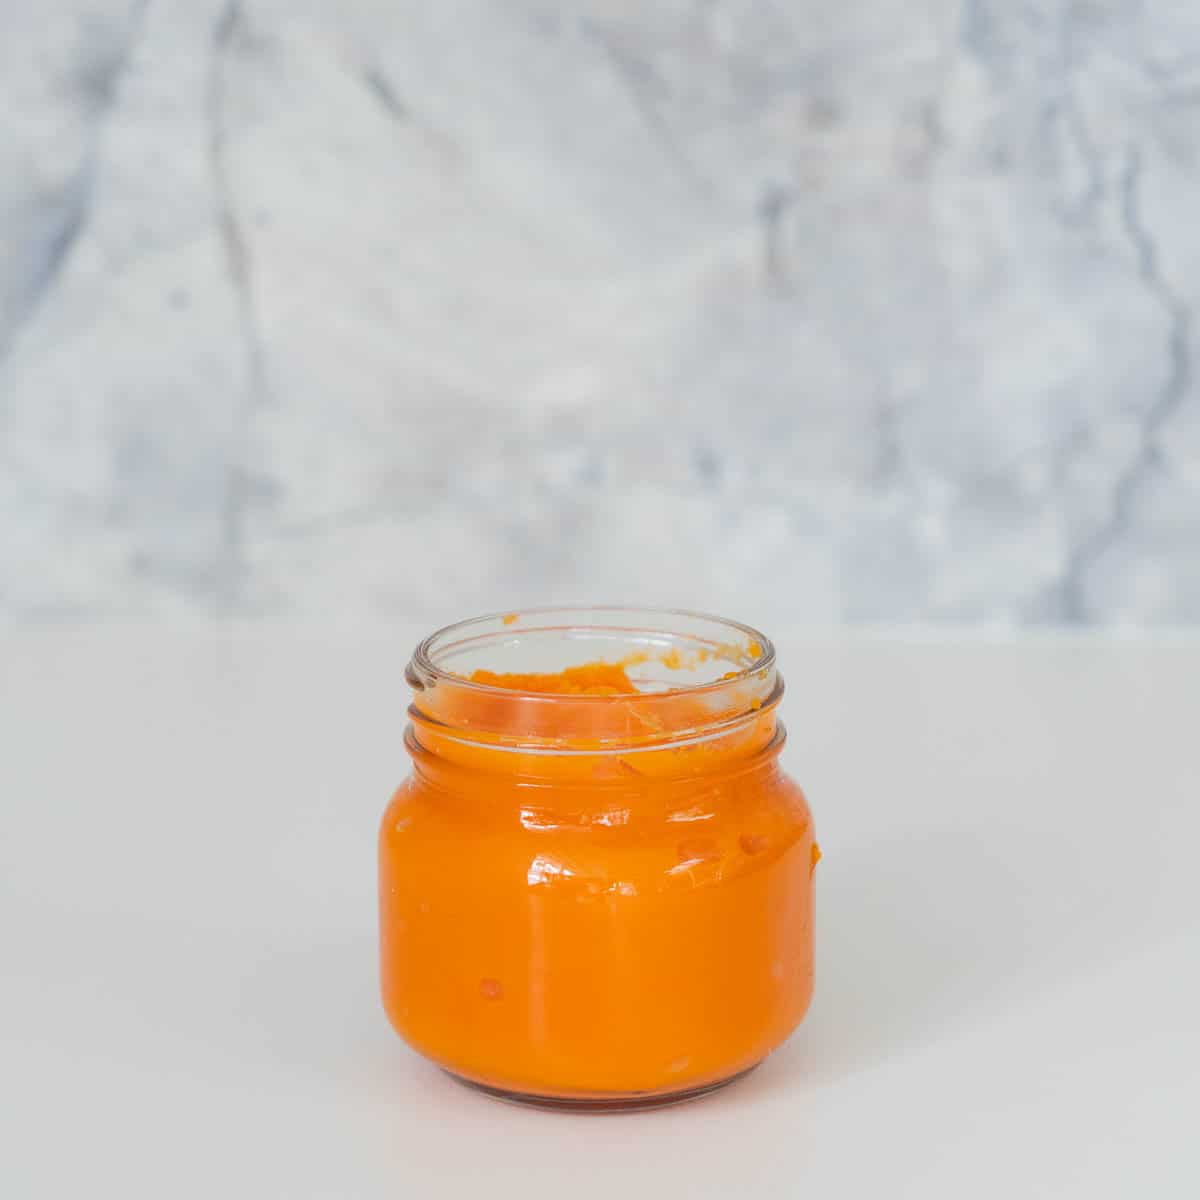 Carrot Baby Food Puree  Stage 1 Baby Food For Your Baby